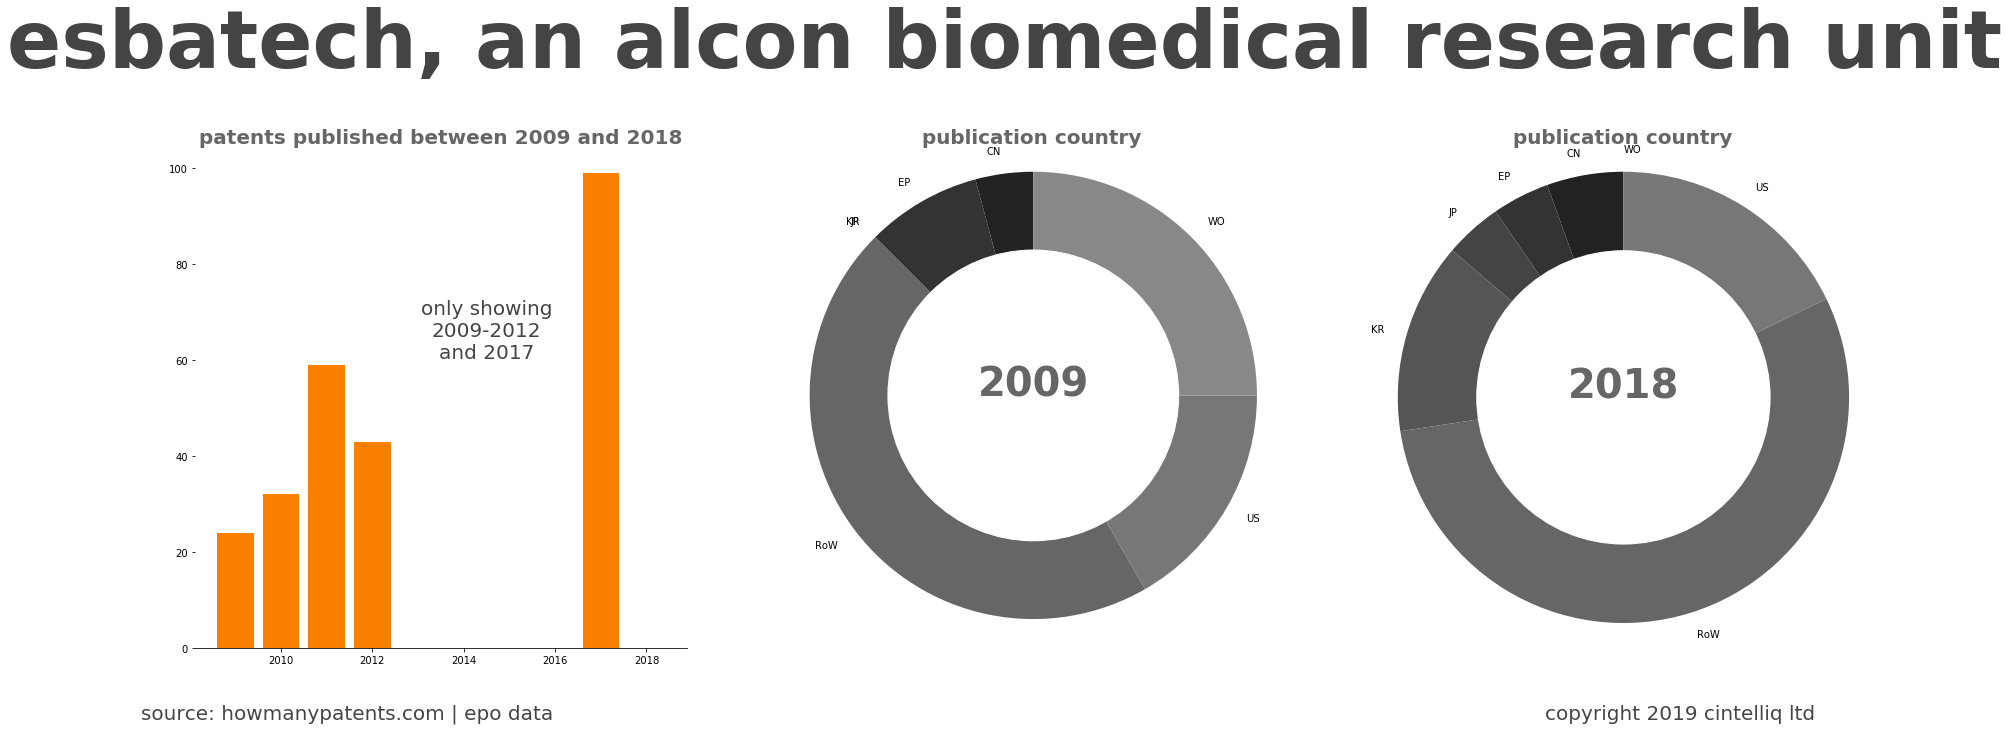 summary of patents for Esbatech, An Alcon Biomedical Research Unit